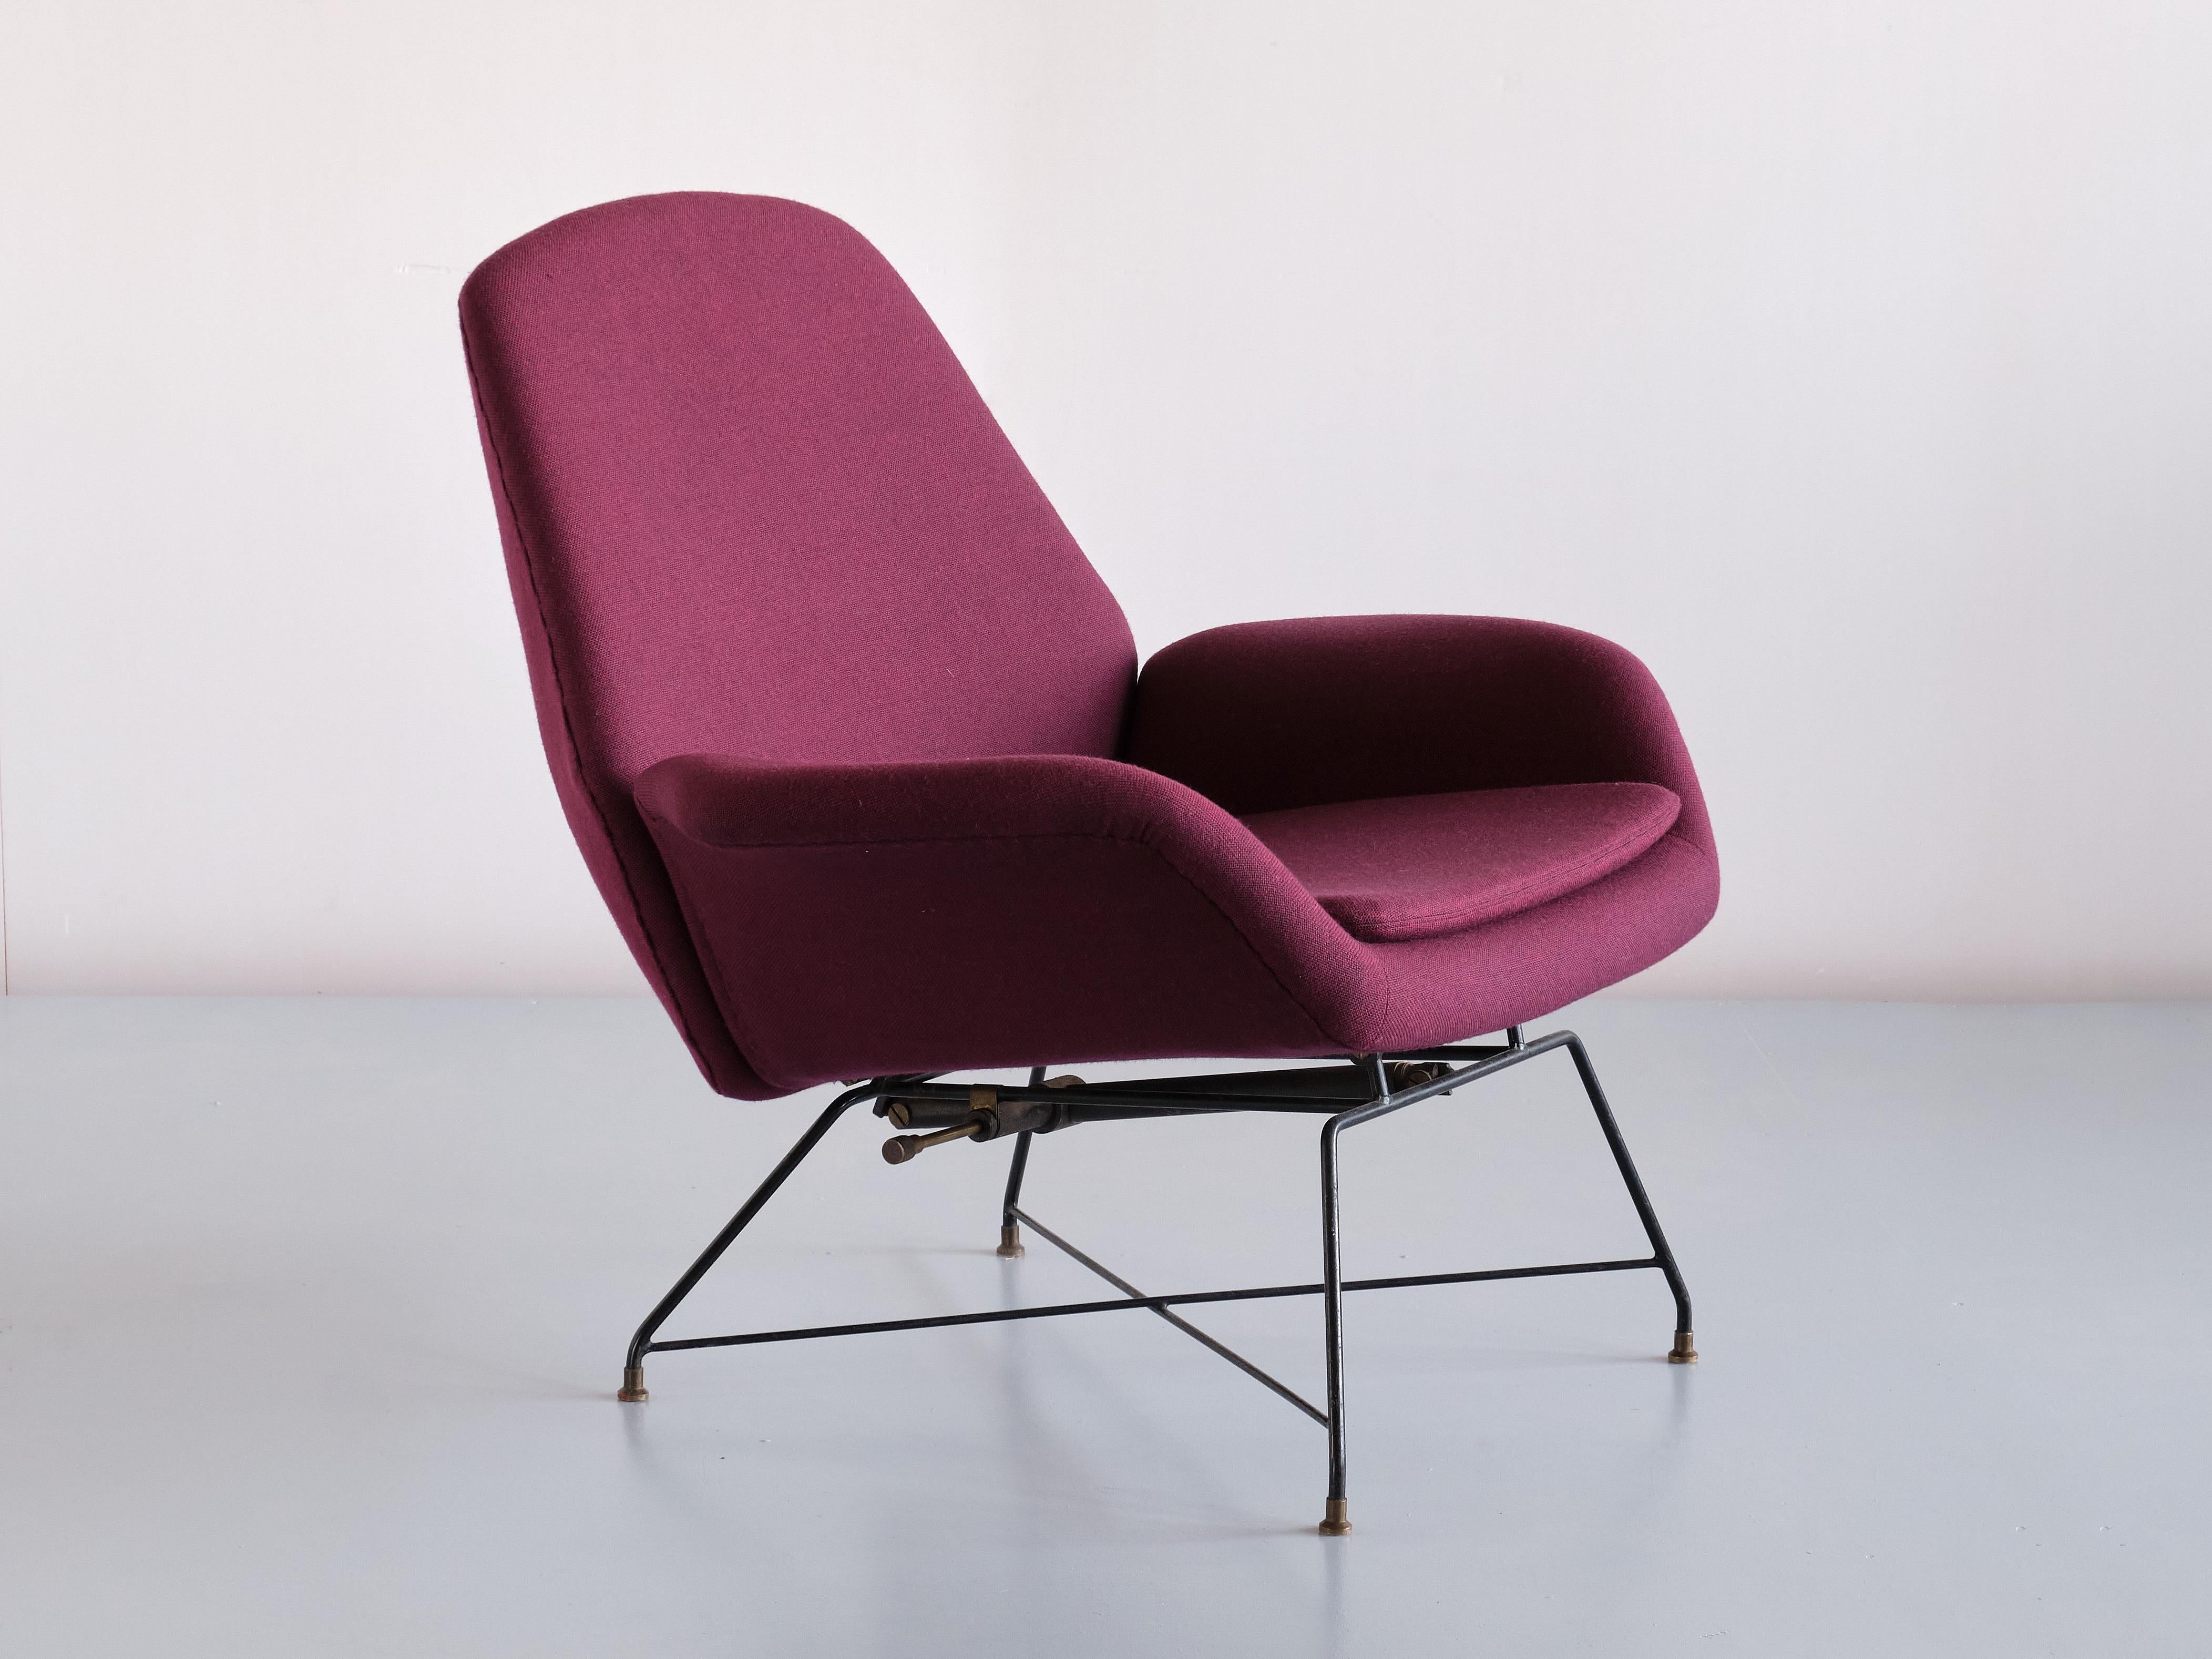 Augusto Bozzi 'Lotus' Adjustable Lounge Chair, Saporiti, Italy, 1960s In Good Condition For Sale In The Hague, NL